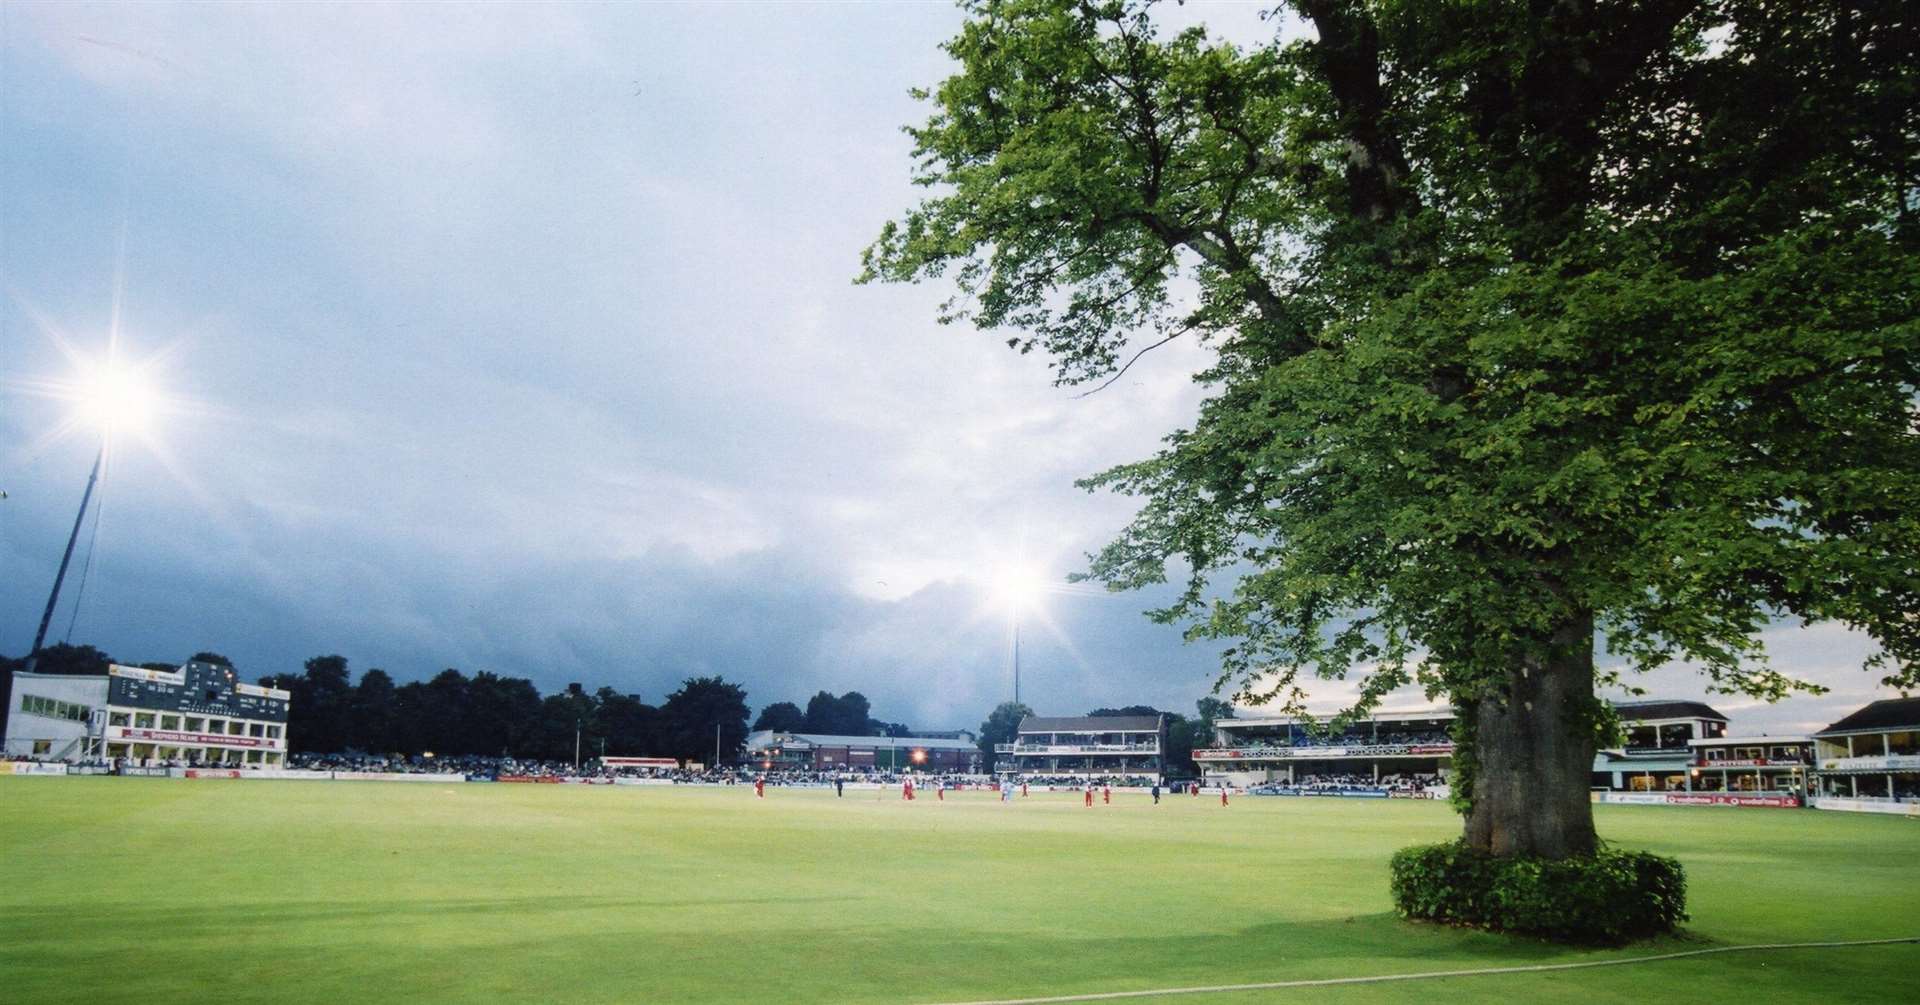 The old Lime Tree at Canterbury's St Lawrence cricket ground was in place since the early 1800s